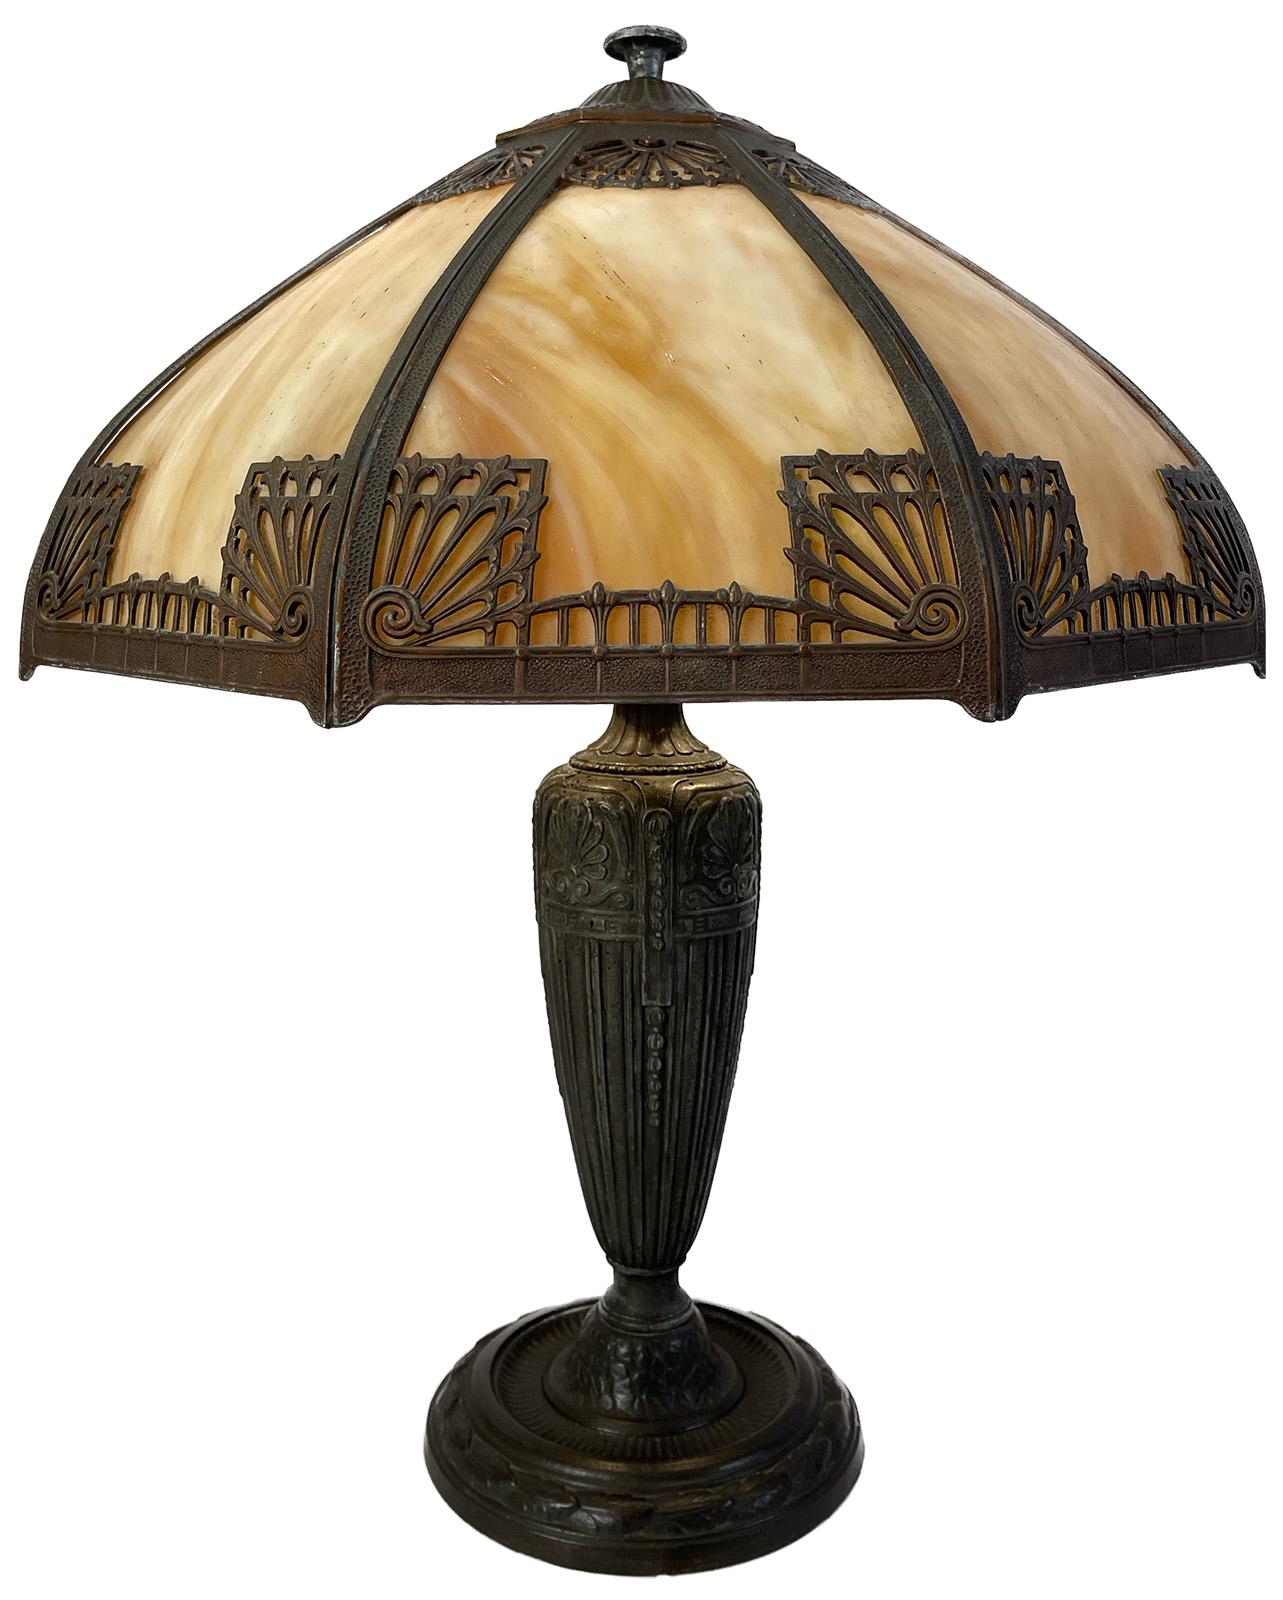 An early 20th century Art Nouveau style lamp with slag glass and bronze detail.

Dimensions: 23.5